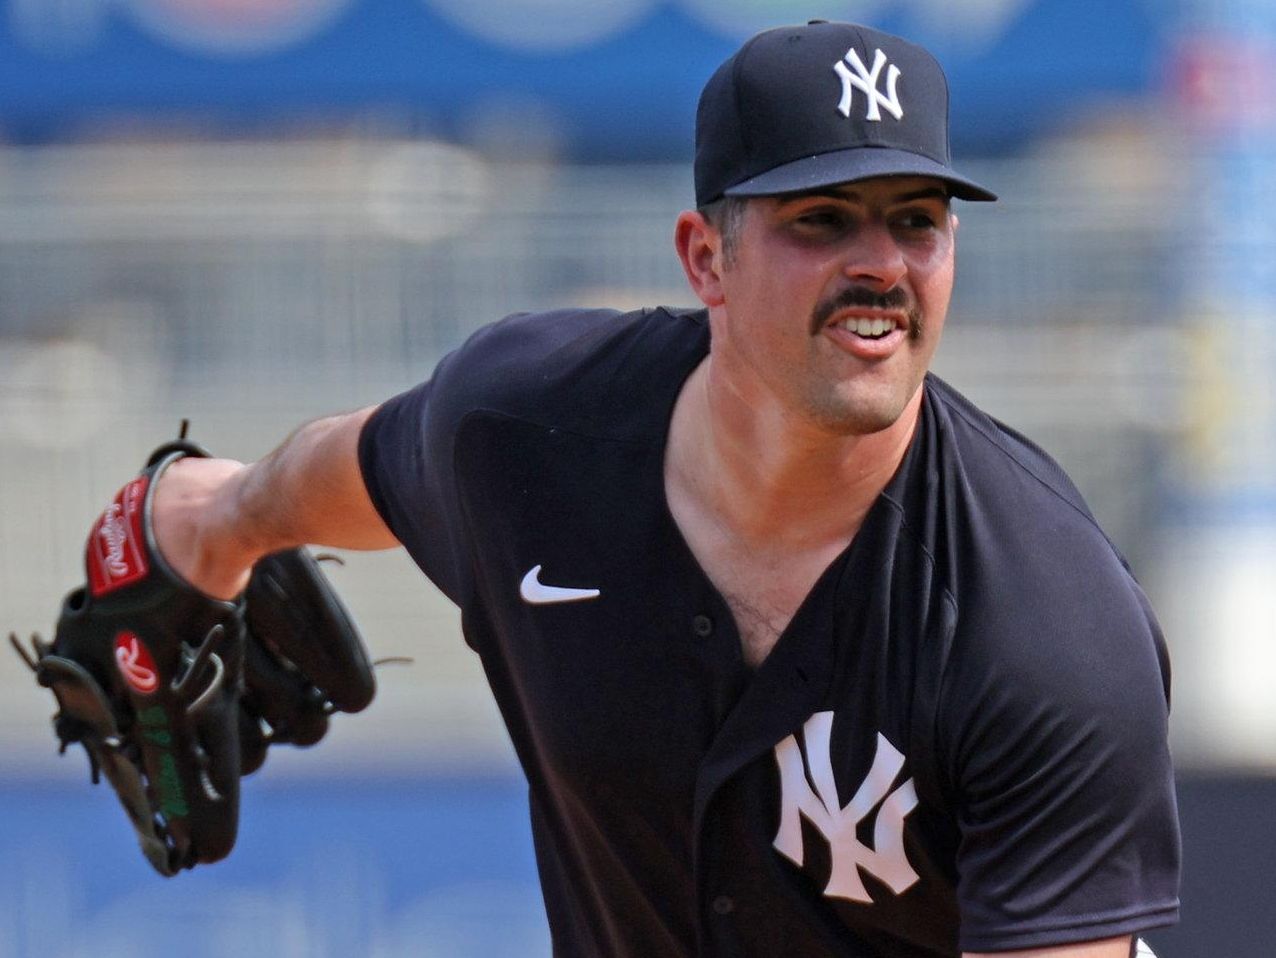 Welcome to the White Sox, Carlos Rodon